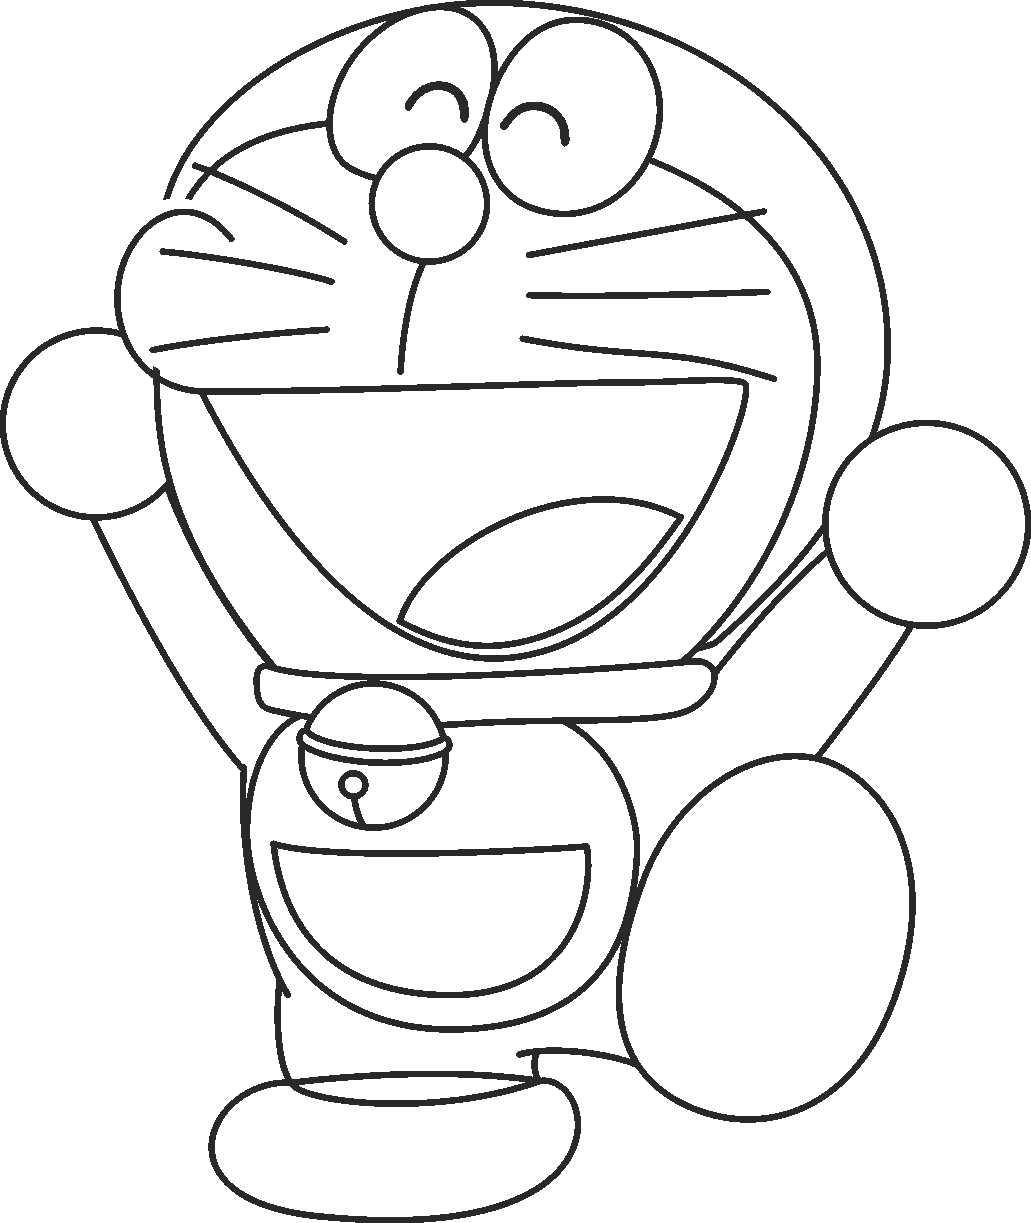 stunning Doraemon Dolouring Coloring Pages free Printout Download